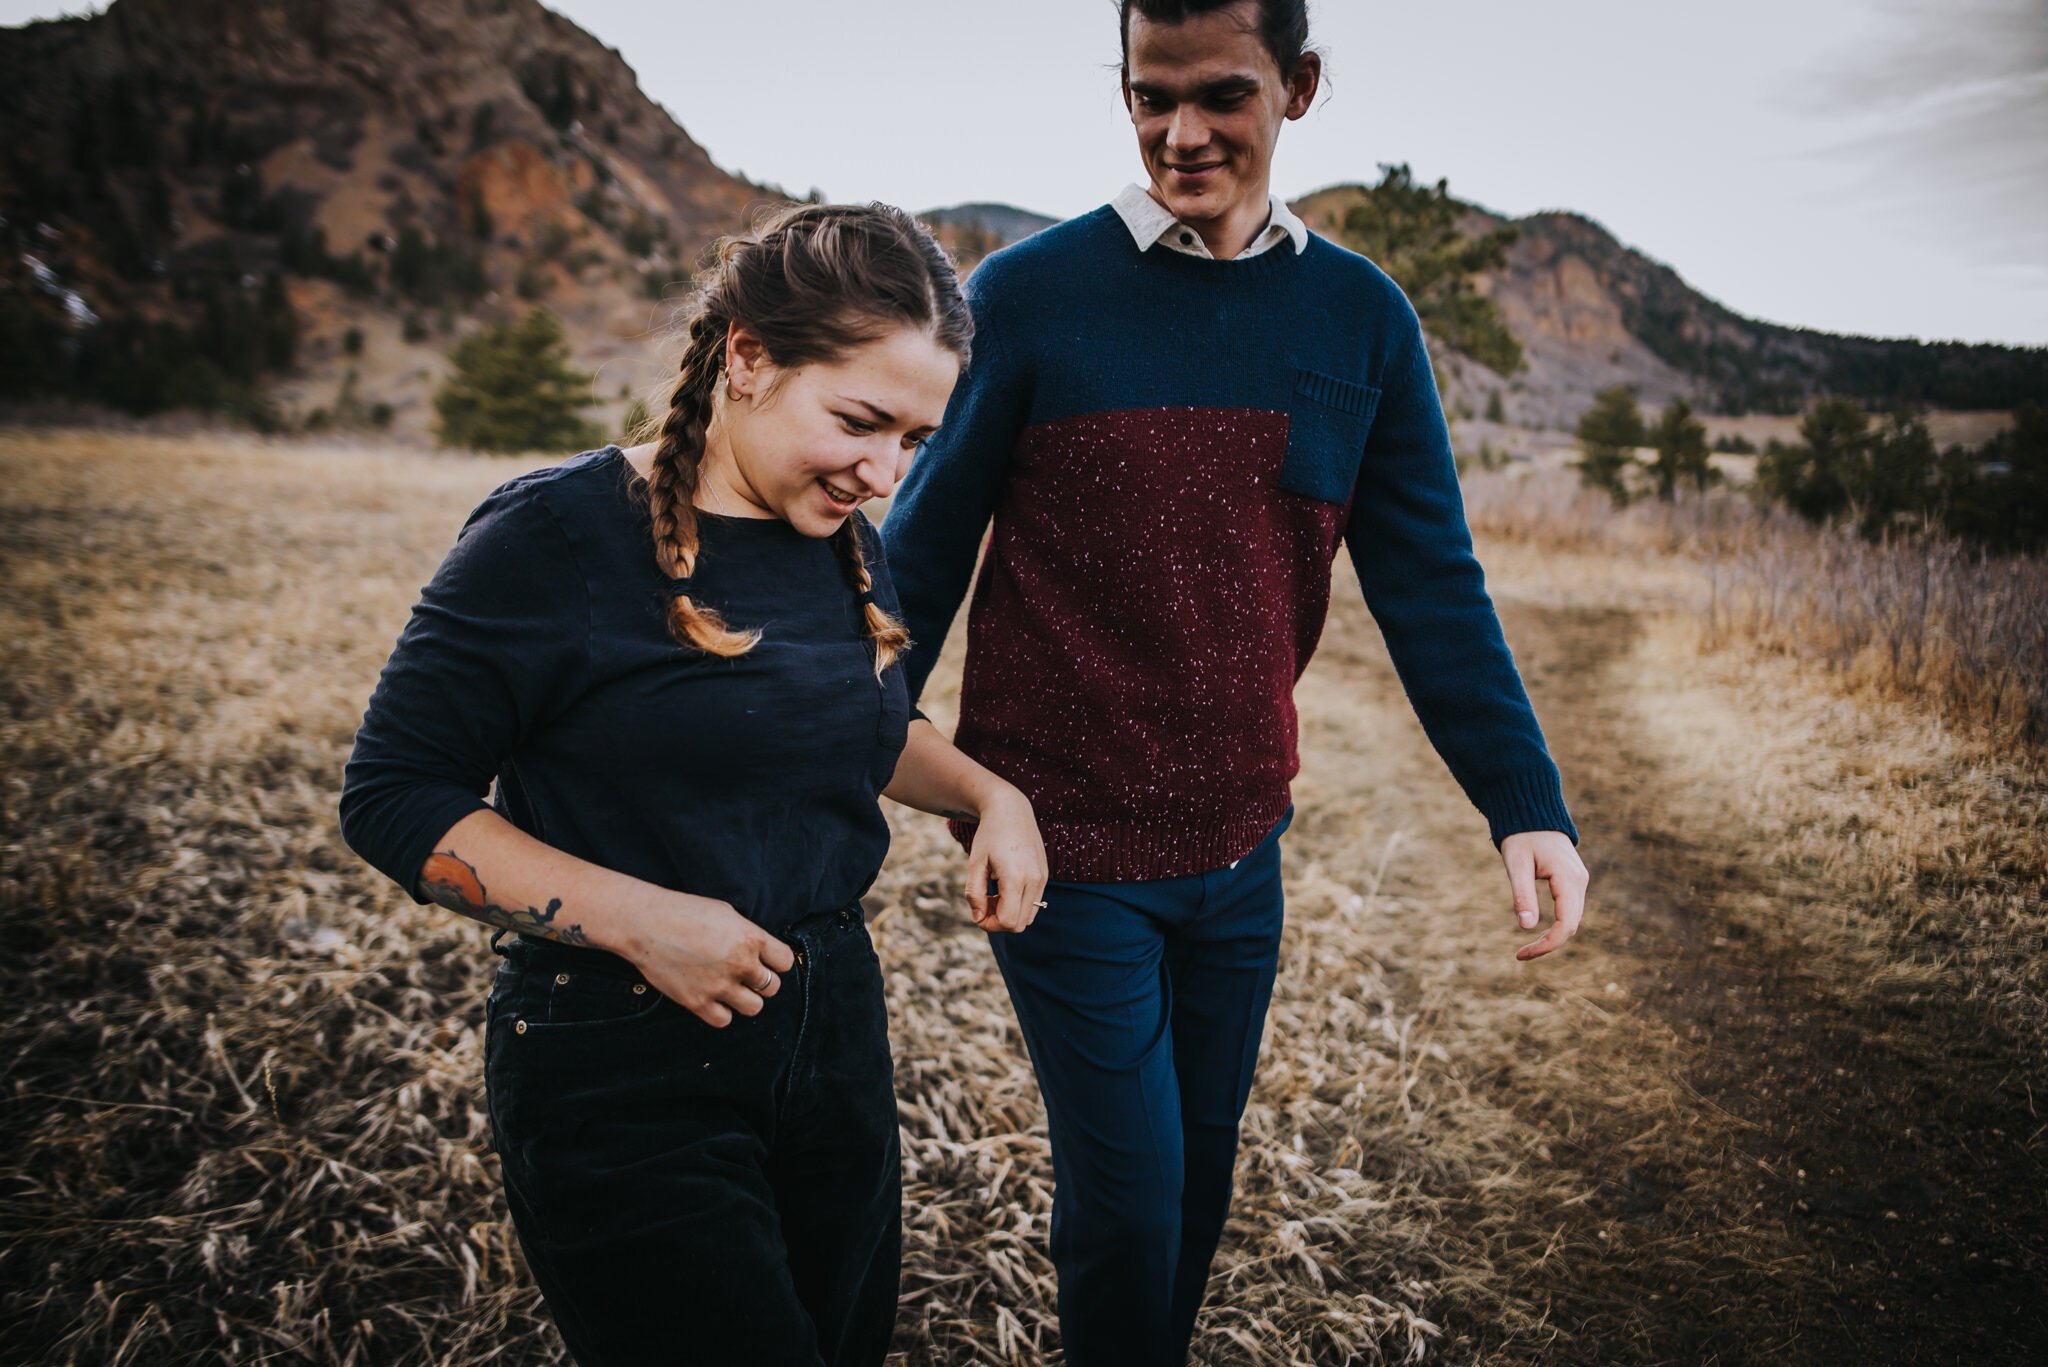 Yulia+and+Logan+Couples+Session+Colorado+Springs+Colorado+Sunset+Cheyenne+Canyon+Husband+Wife+Wild+Prairie+Photography-16-2020.jpeg